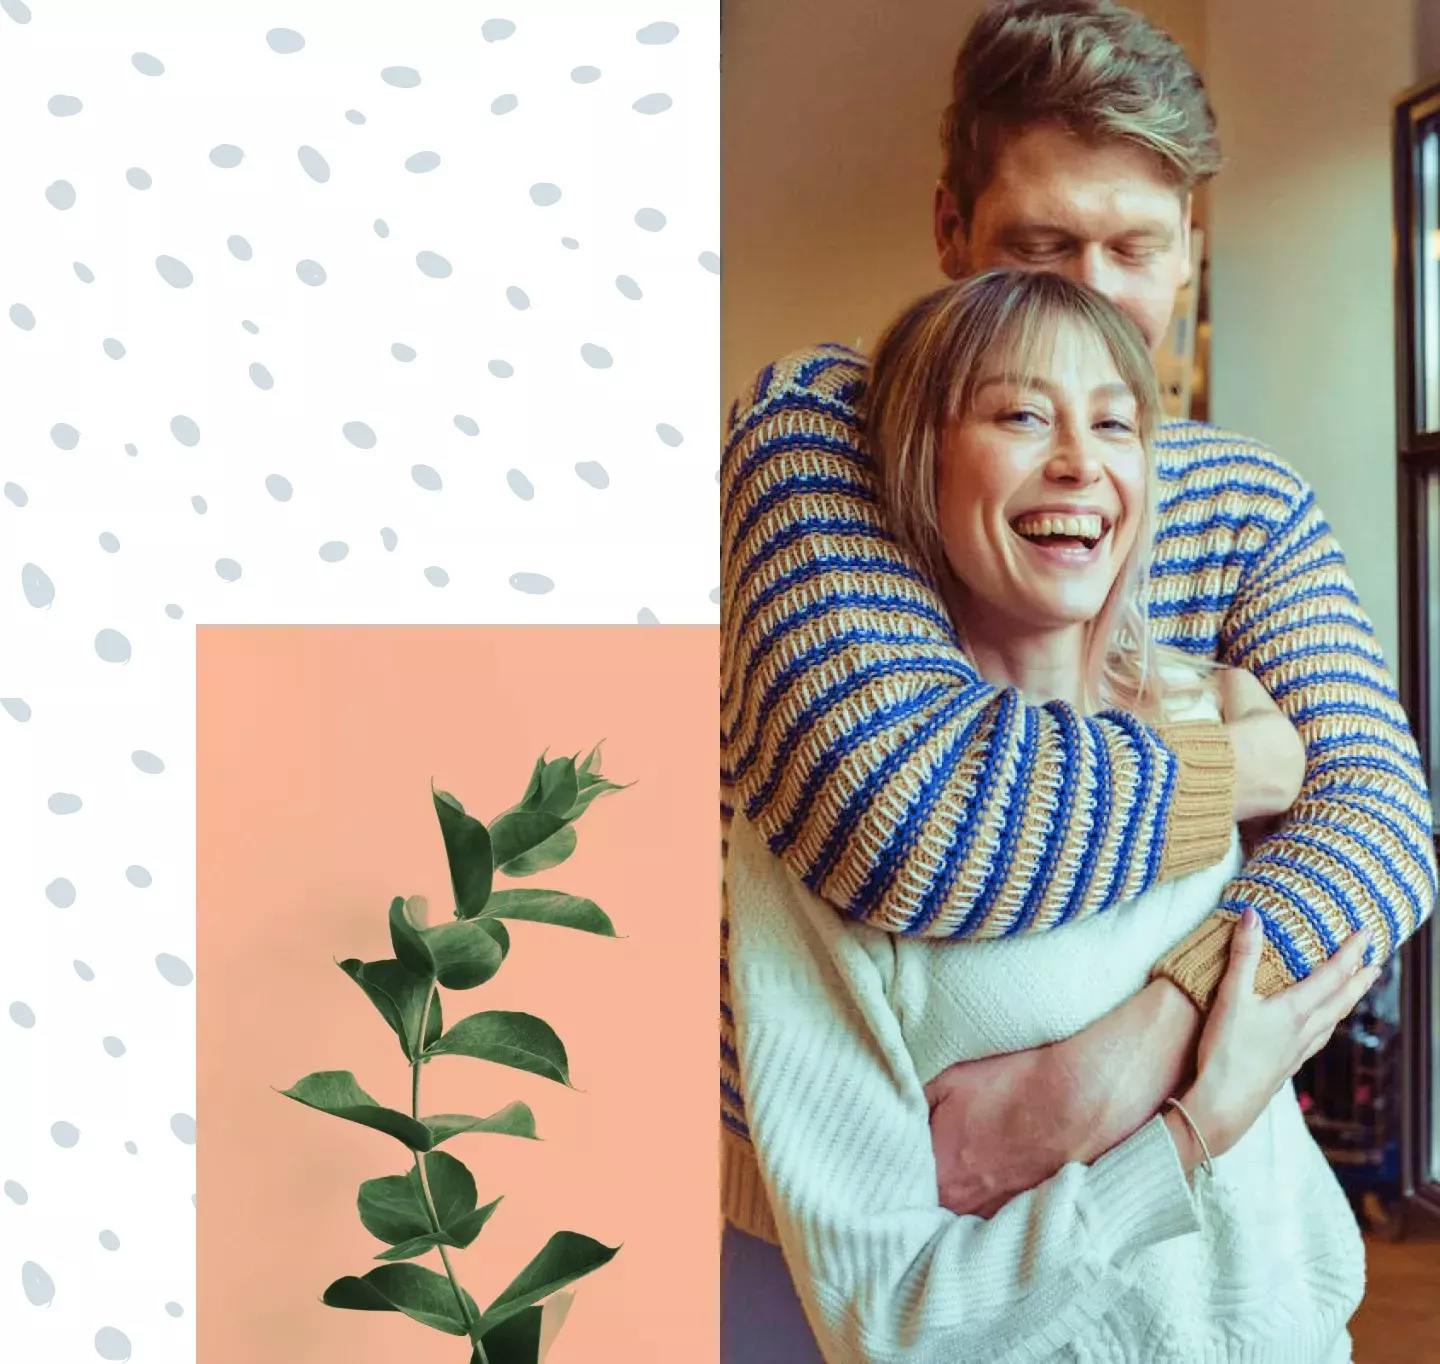 man hugging woman from behind, plant